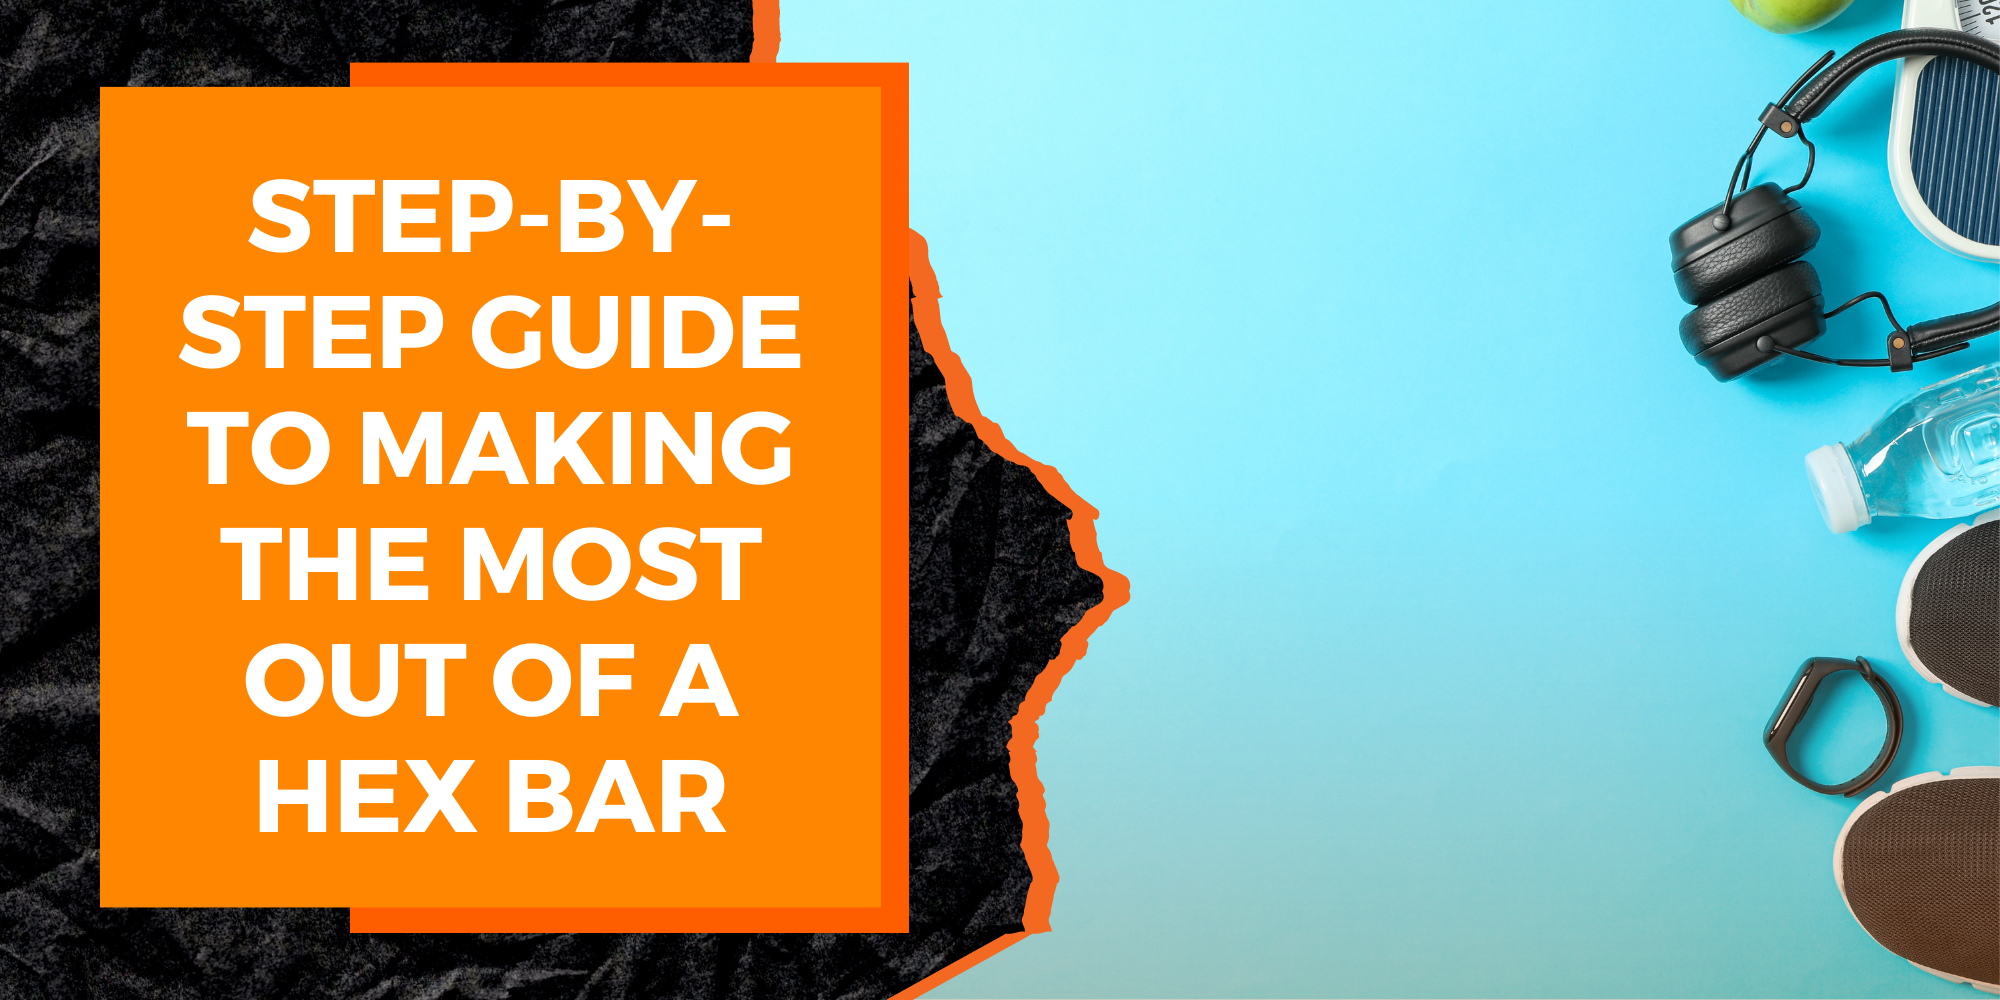 Step-by-Step Guide to Making the Most Out of a Hex Bar